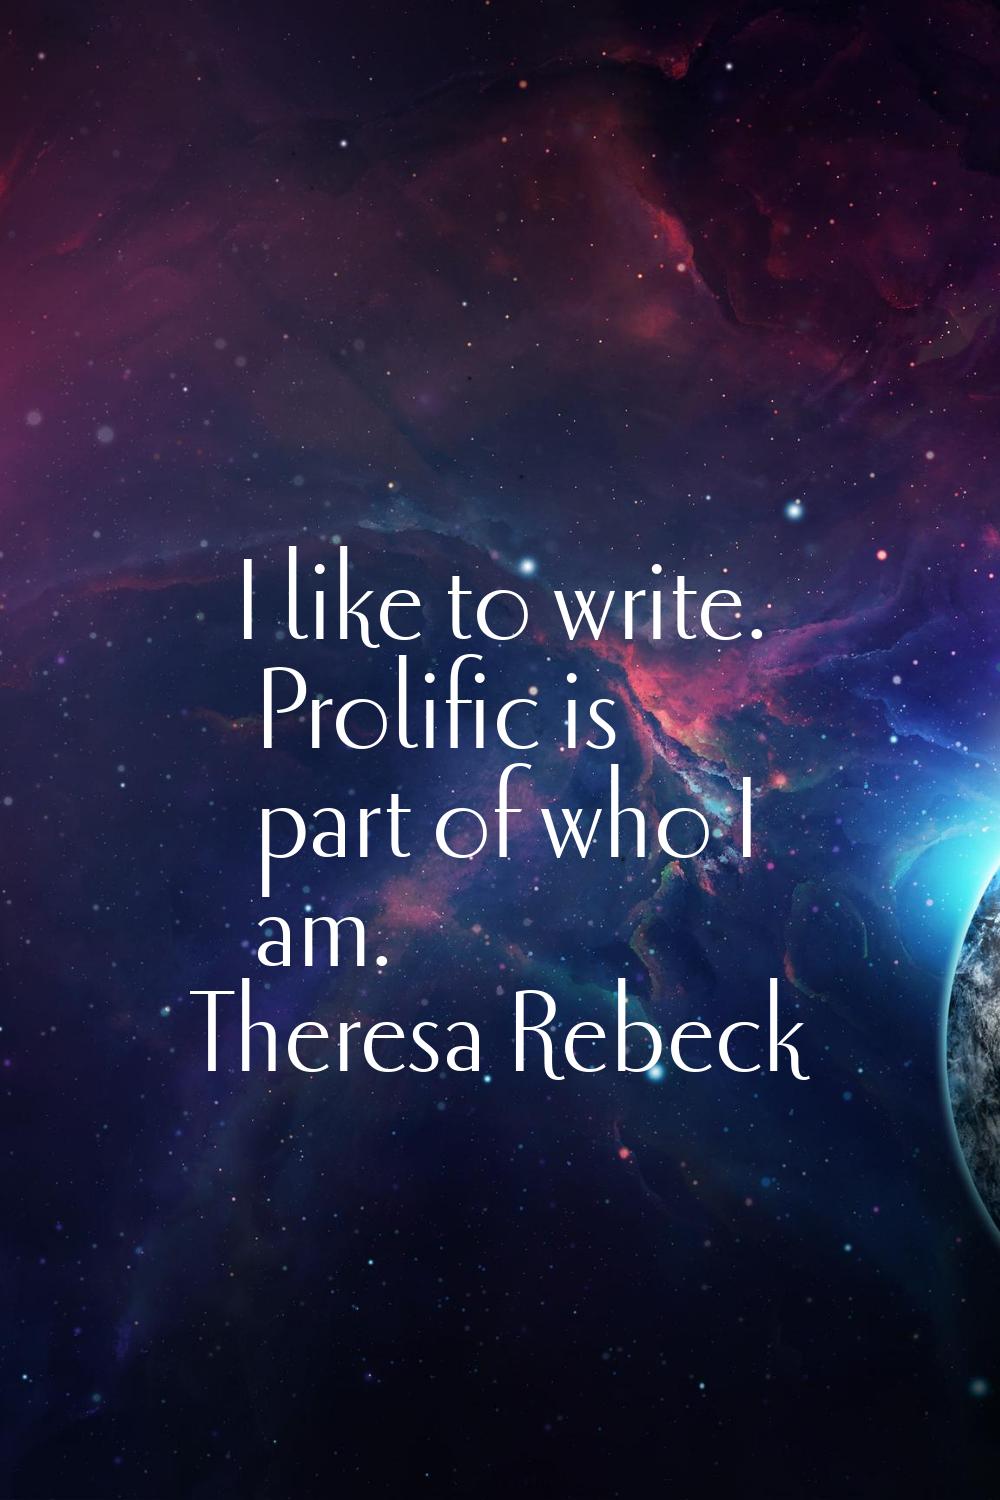 I like to write. Prolific is part of who I am.